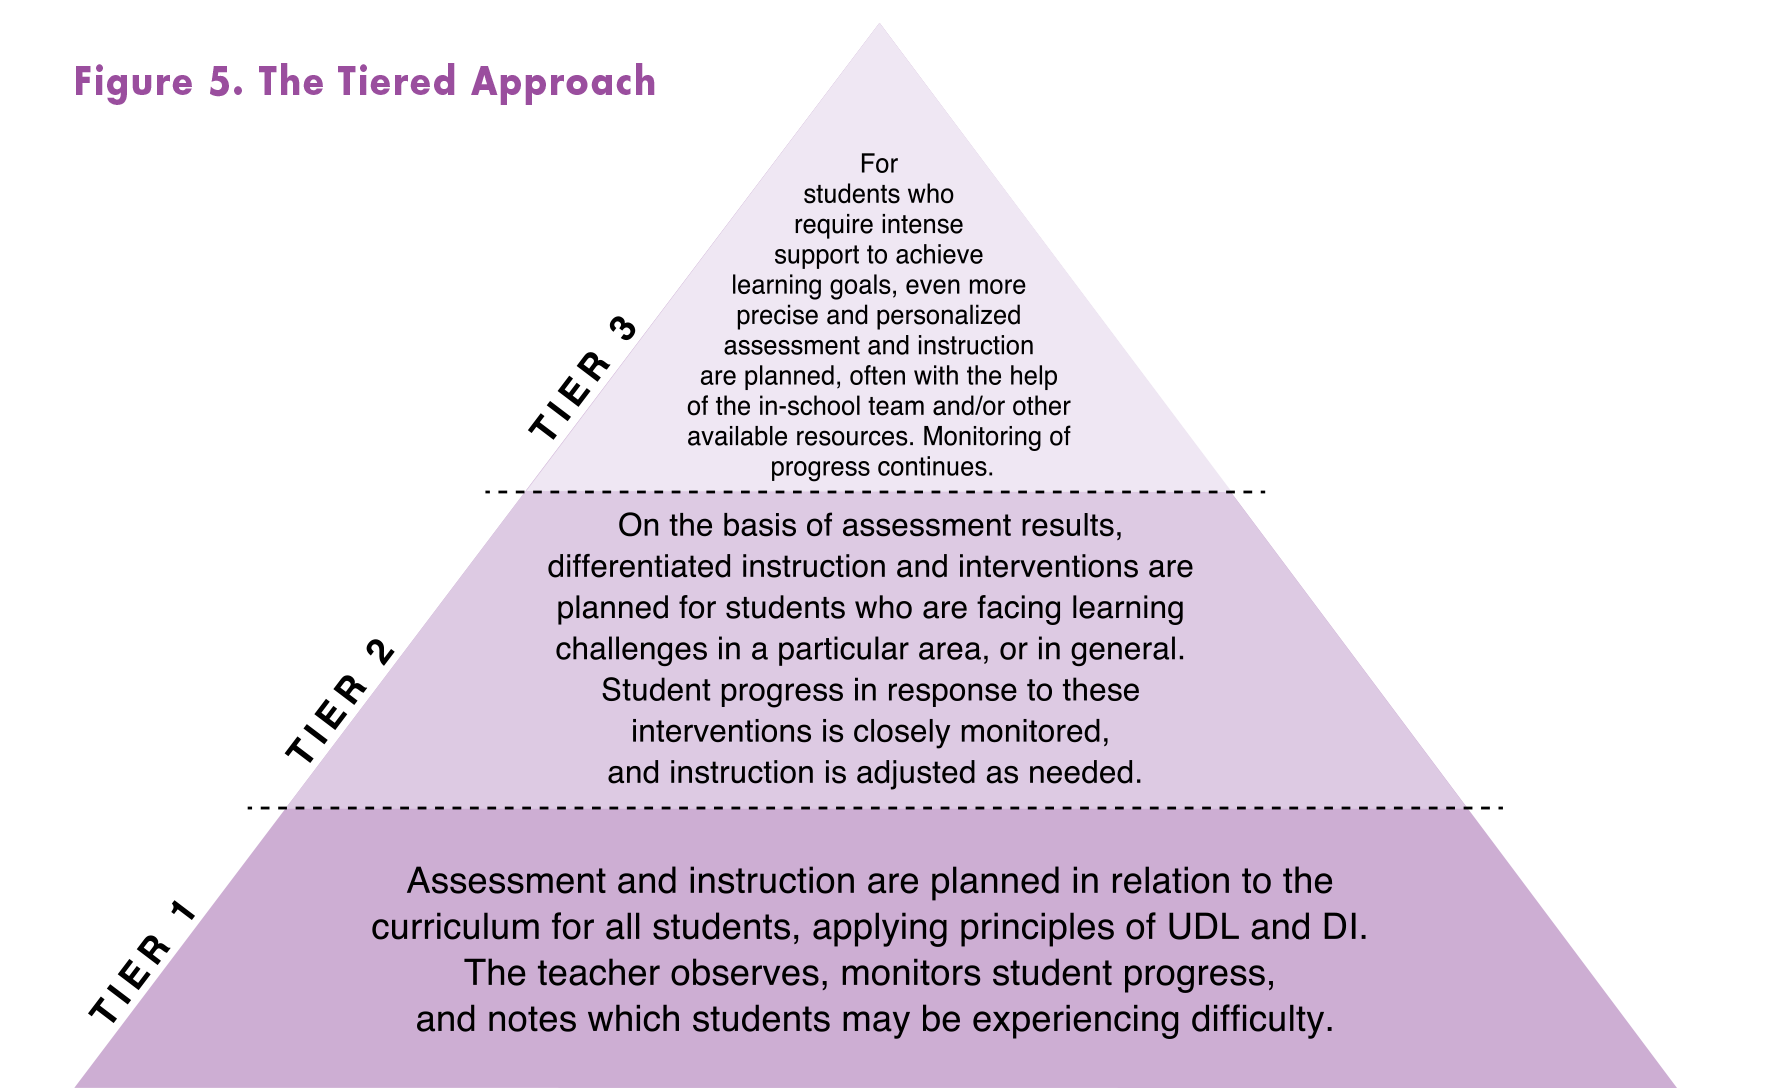 Pyramid: The tiered approach (Ministry of Education) Tier 1 (bottom level): Assessment and instruction are planned in relation to the curriculum for all students, applying principles of UDL and DI. The teacher observes, monitors student progress, and notes which students may be experiencing difficulty. Tier 2 (middle of pyramid): On the basis of assessment results, differentiated instruction and interventions are planned for students who are facing learning challenges in a particular area, or in general. Student progress in response to these interventions is closely monitored, and instruction is adjusted as needed. Tier 3 (top of pyramid): For students who require intense support to achieve learning goals, even more precise and personalized assessment and instruction are planned, often with the help of the in-school team and/or other available resources. Monitoring of progress continues.